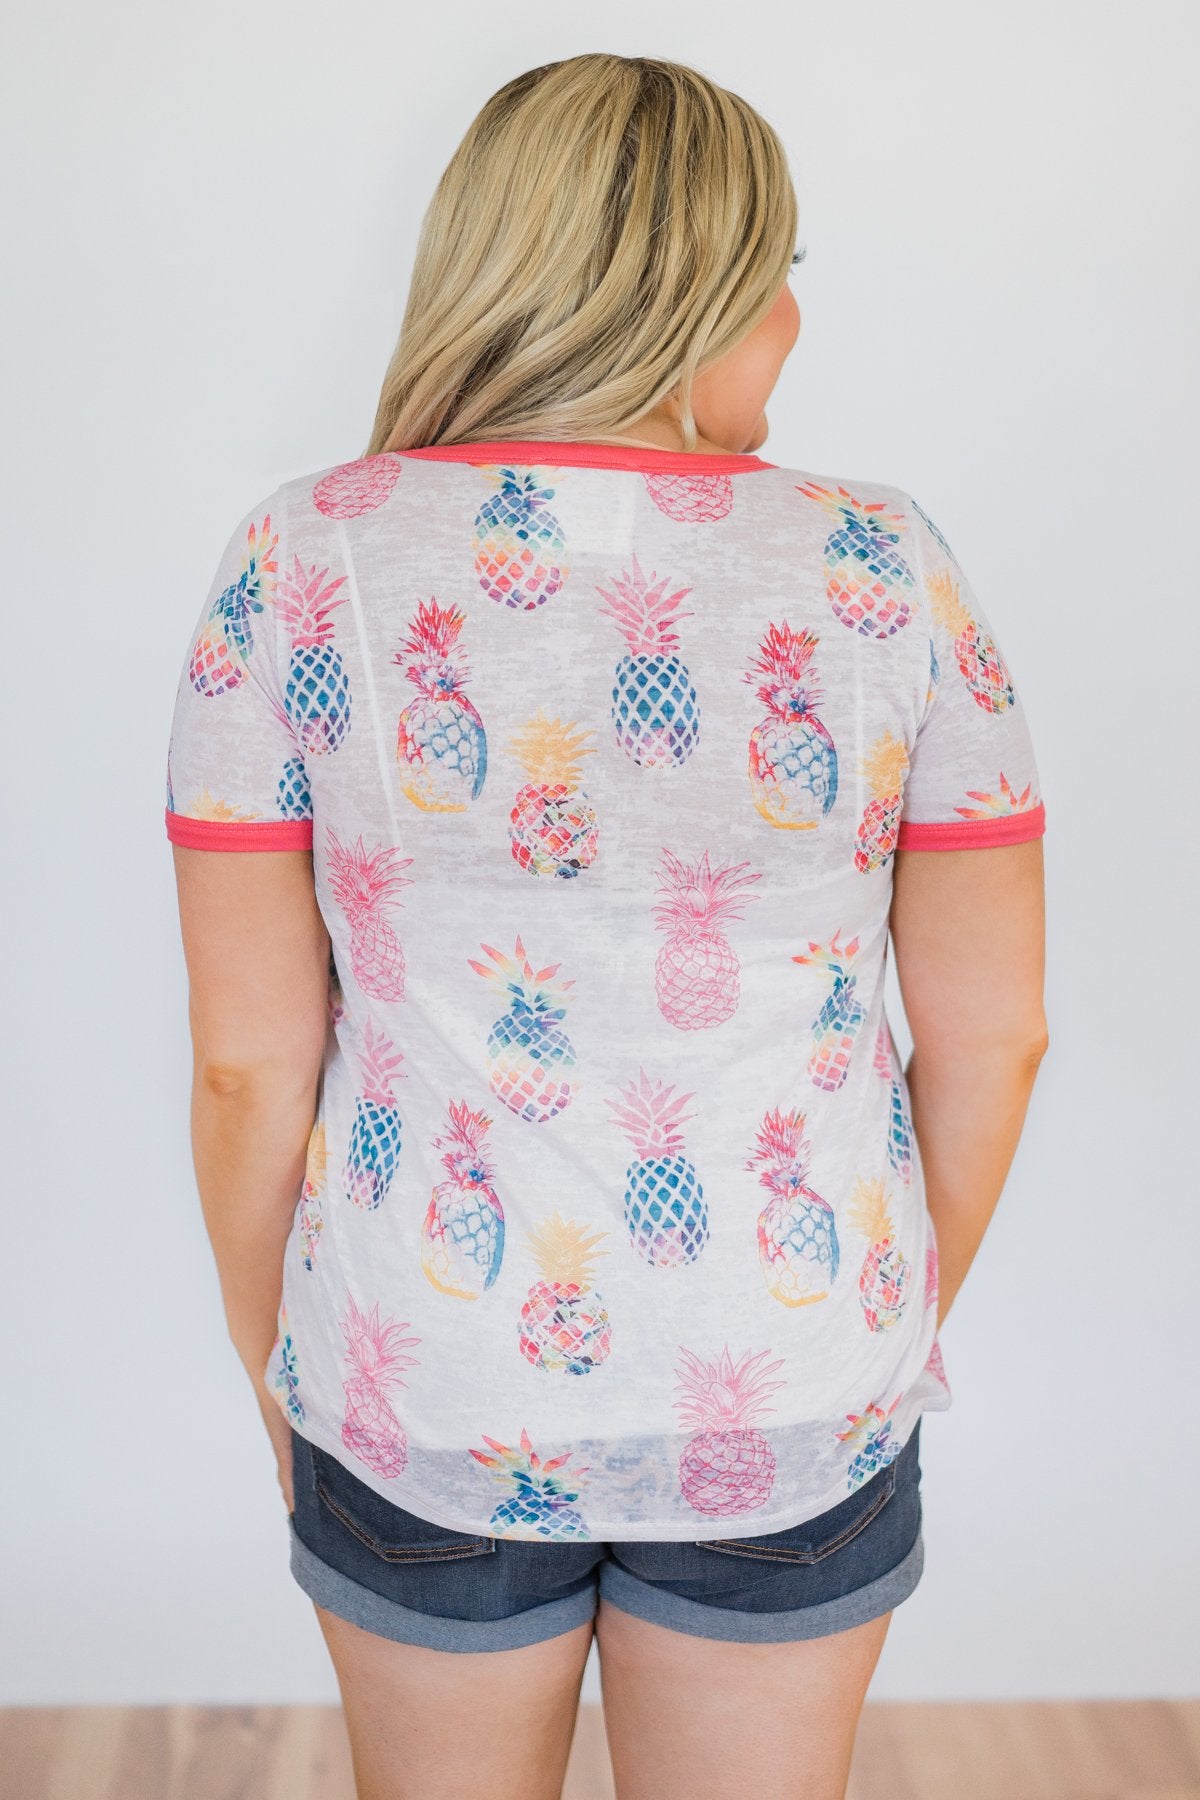 Stand Tall Pineapple Top